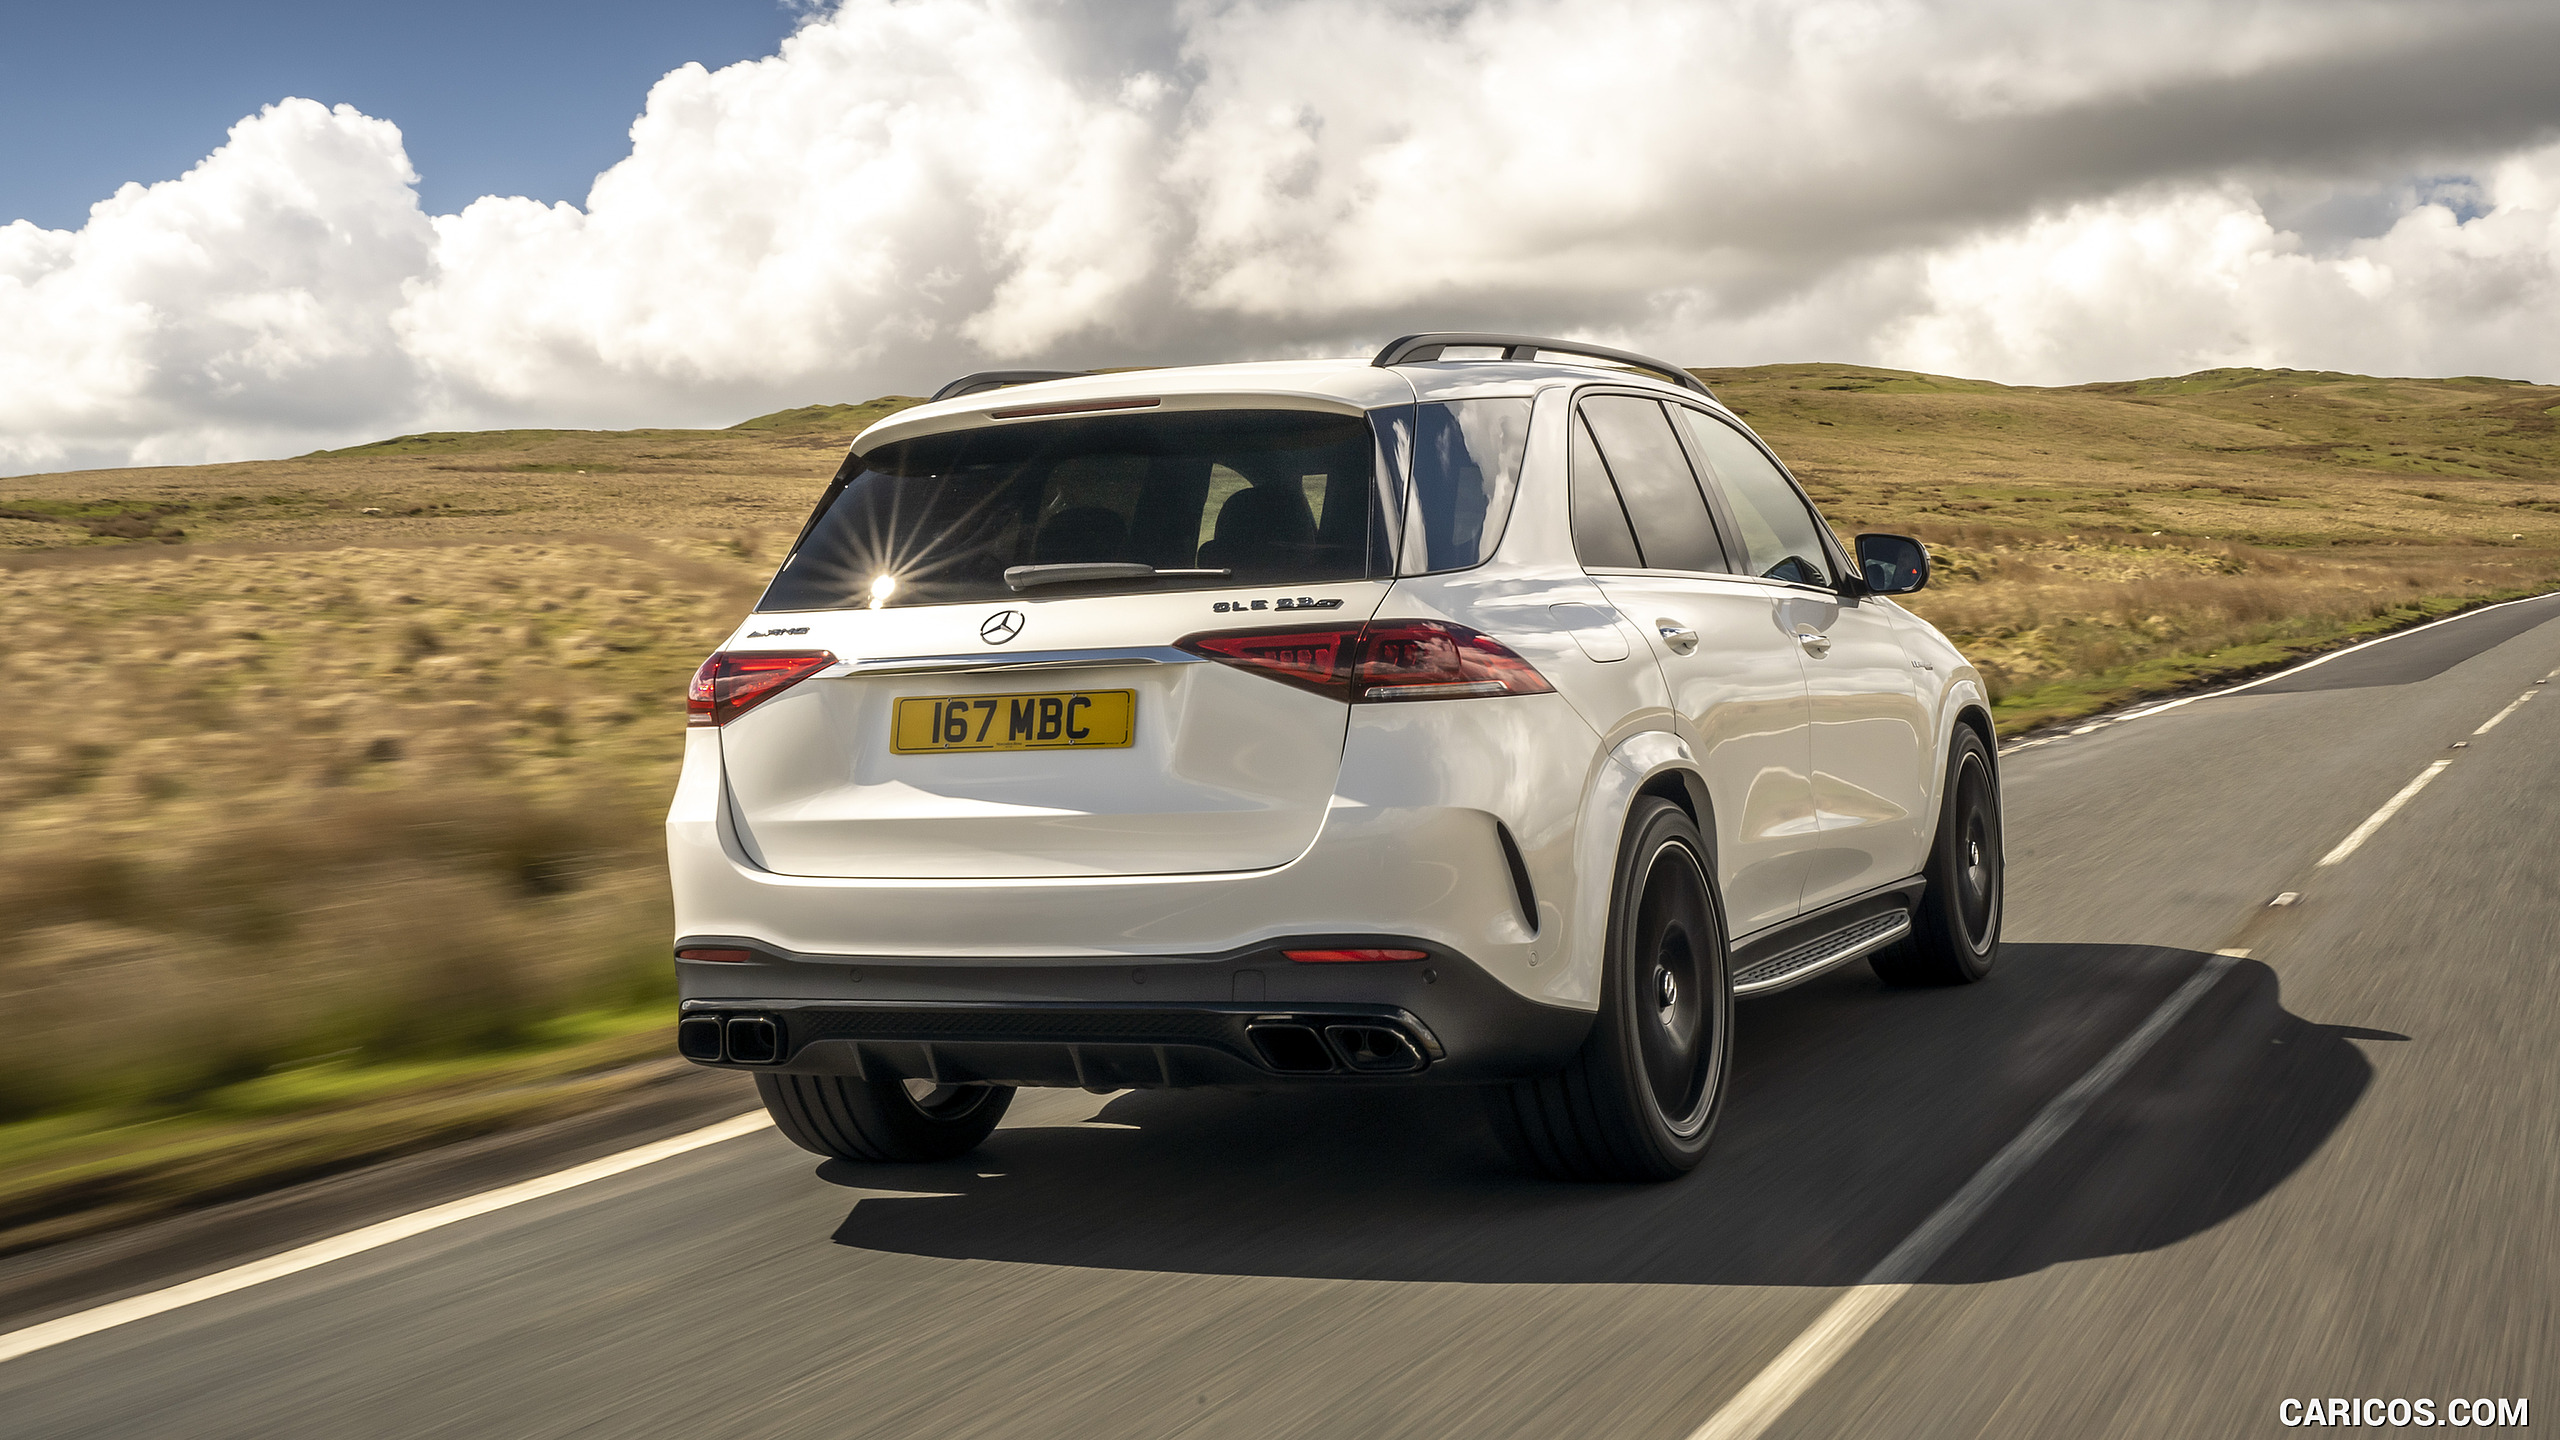 2021 Mercedes-AMG GLE 63 S 4MATIC (UK-Spec) - Rear, #123 of 187